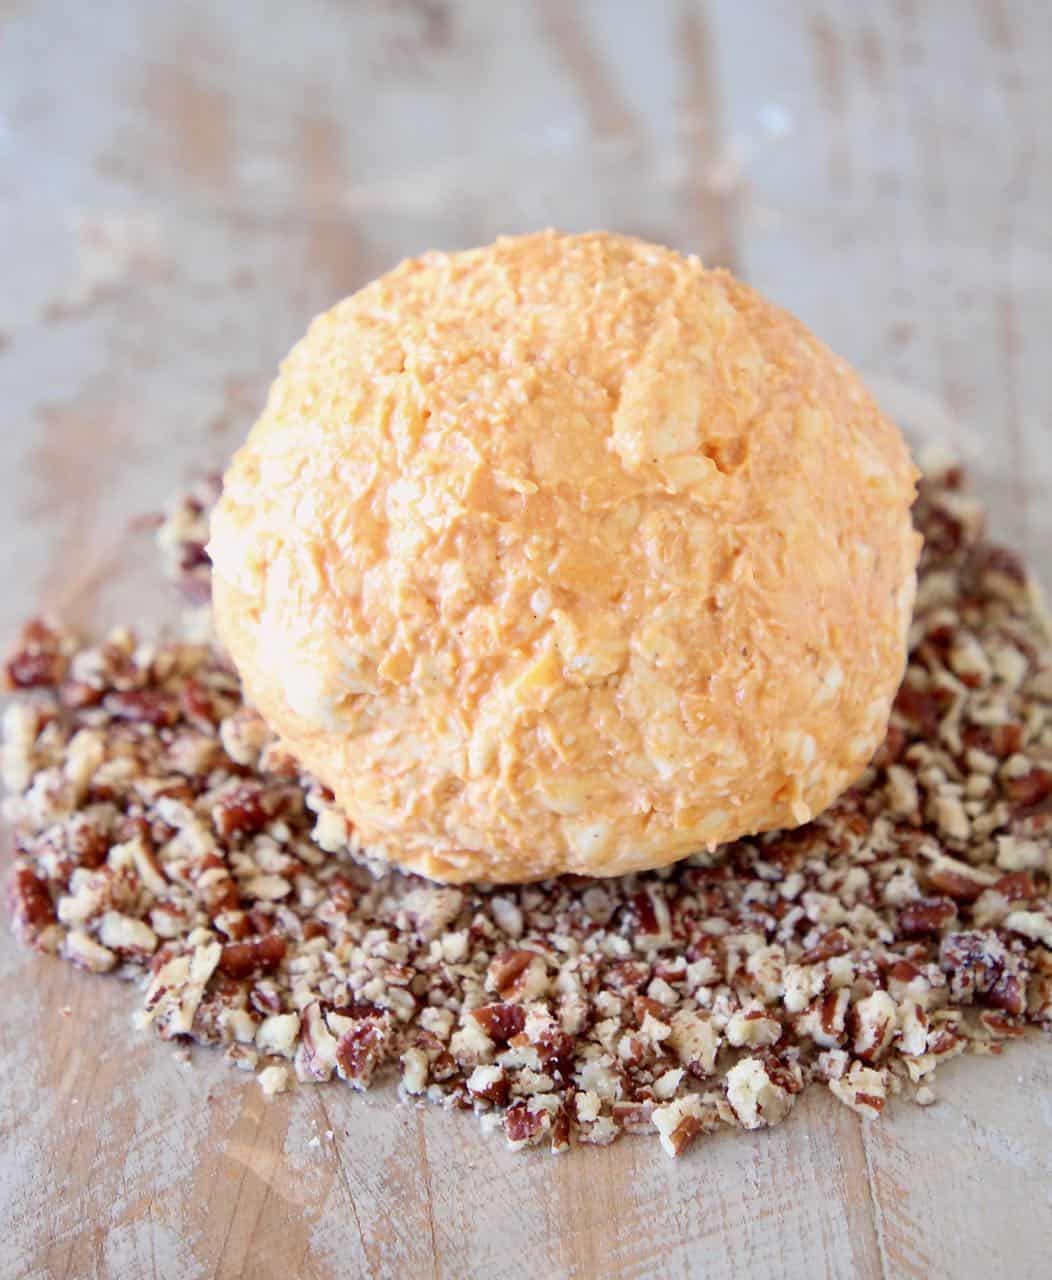 Image showing how to make a buffalo cream cheese ball